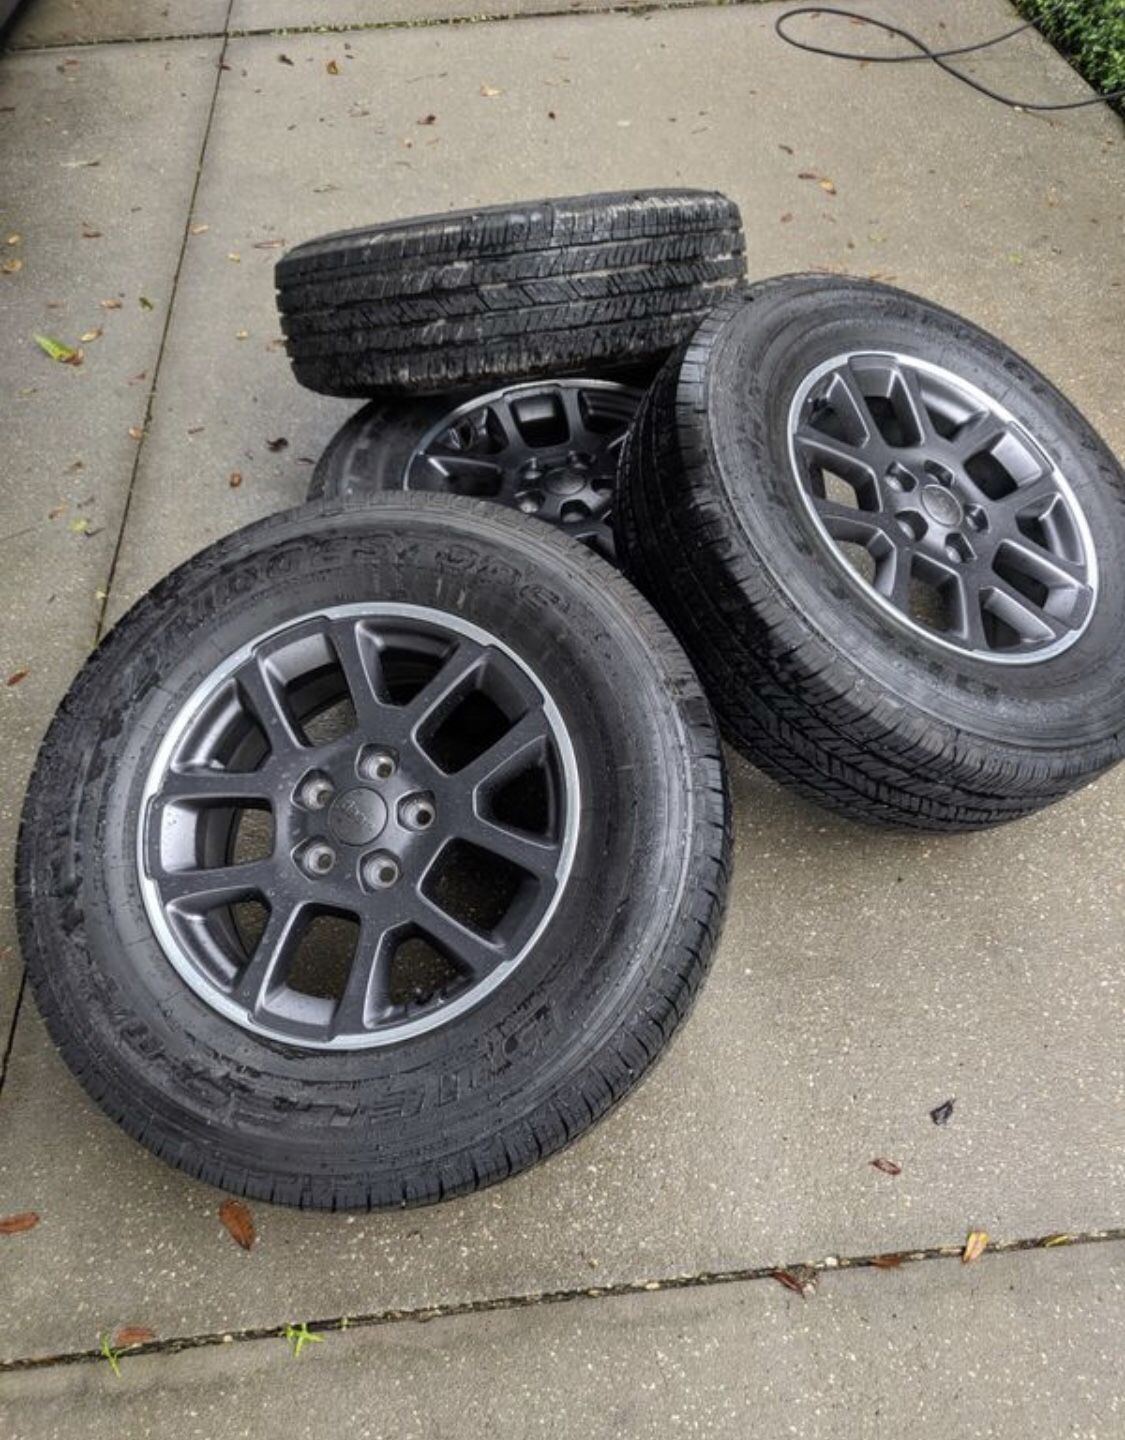 Brand new 2020 Jeep Gladiator wheels and tires